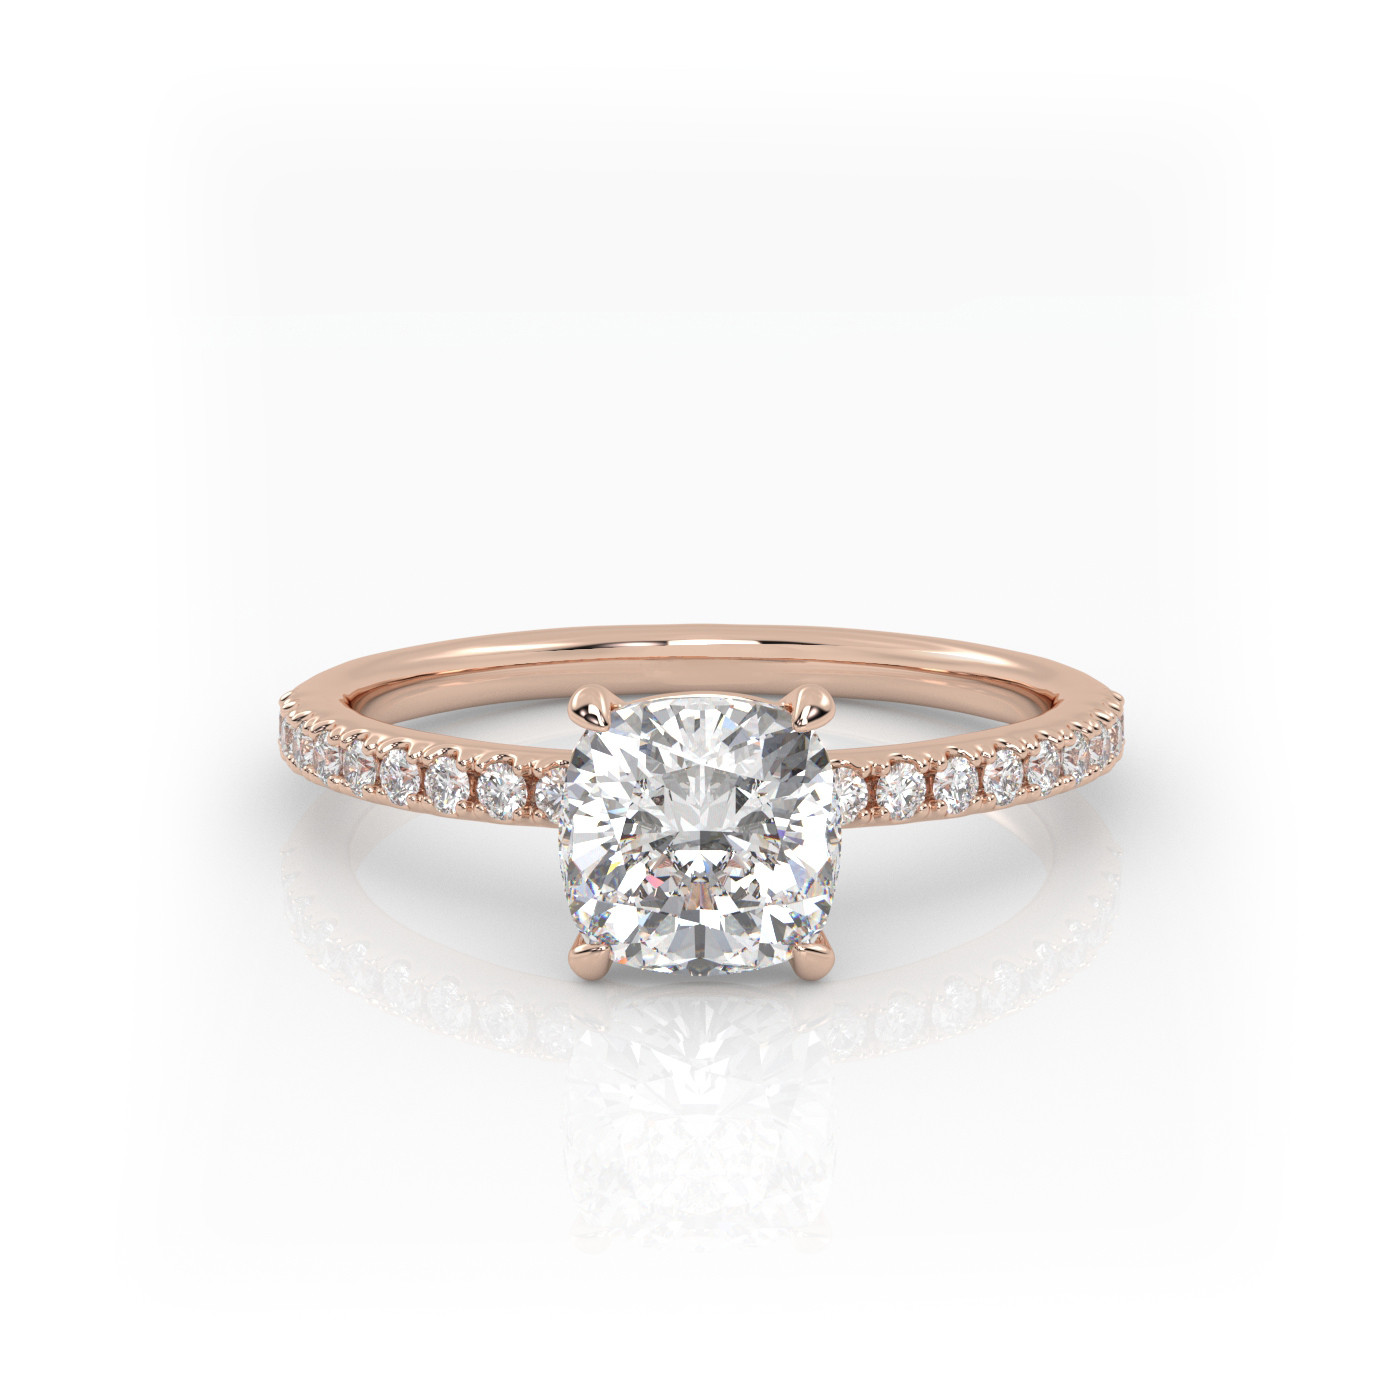 18K ROSE GOLD Cushion Cut Solitaire Engagement Ring with Pave Band